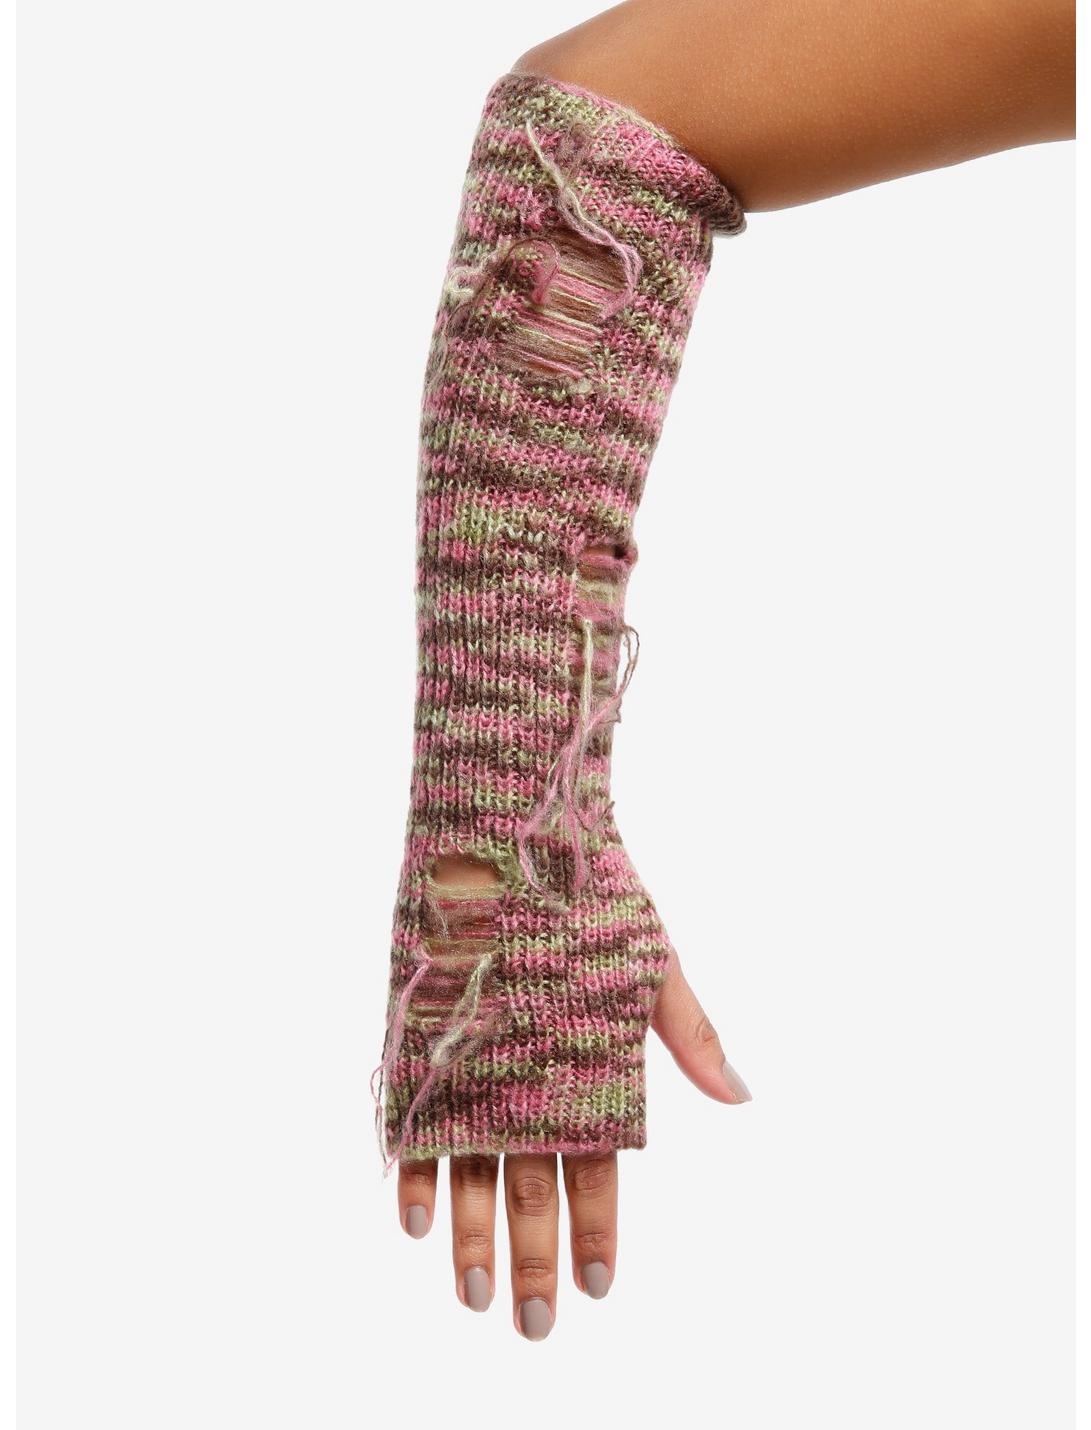 Pink Brown & Green Destructed Knit Arm Warmers, , hi-res